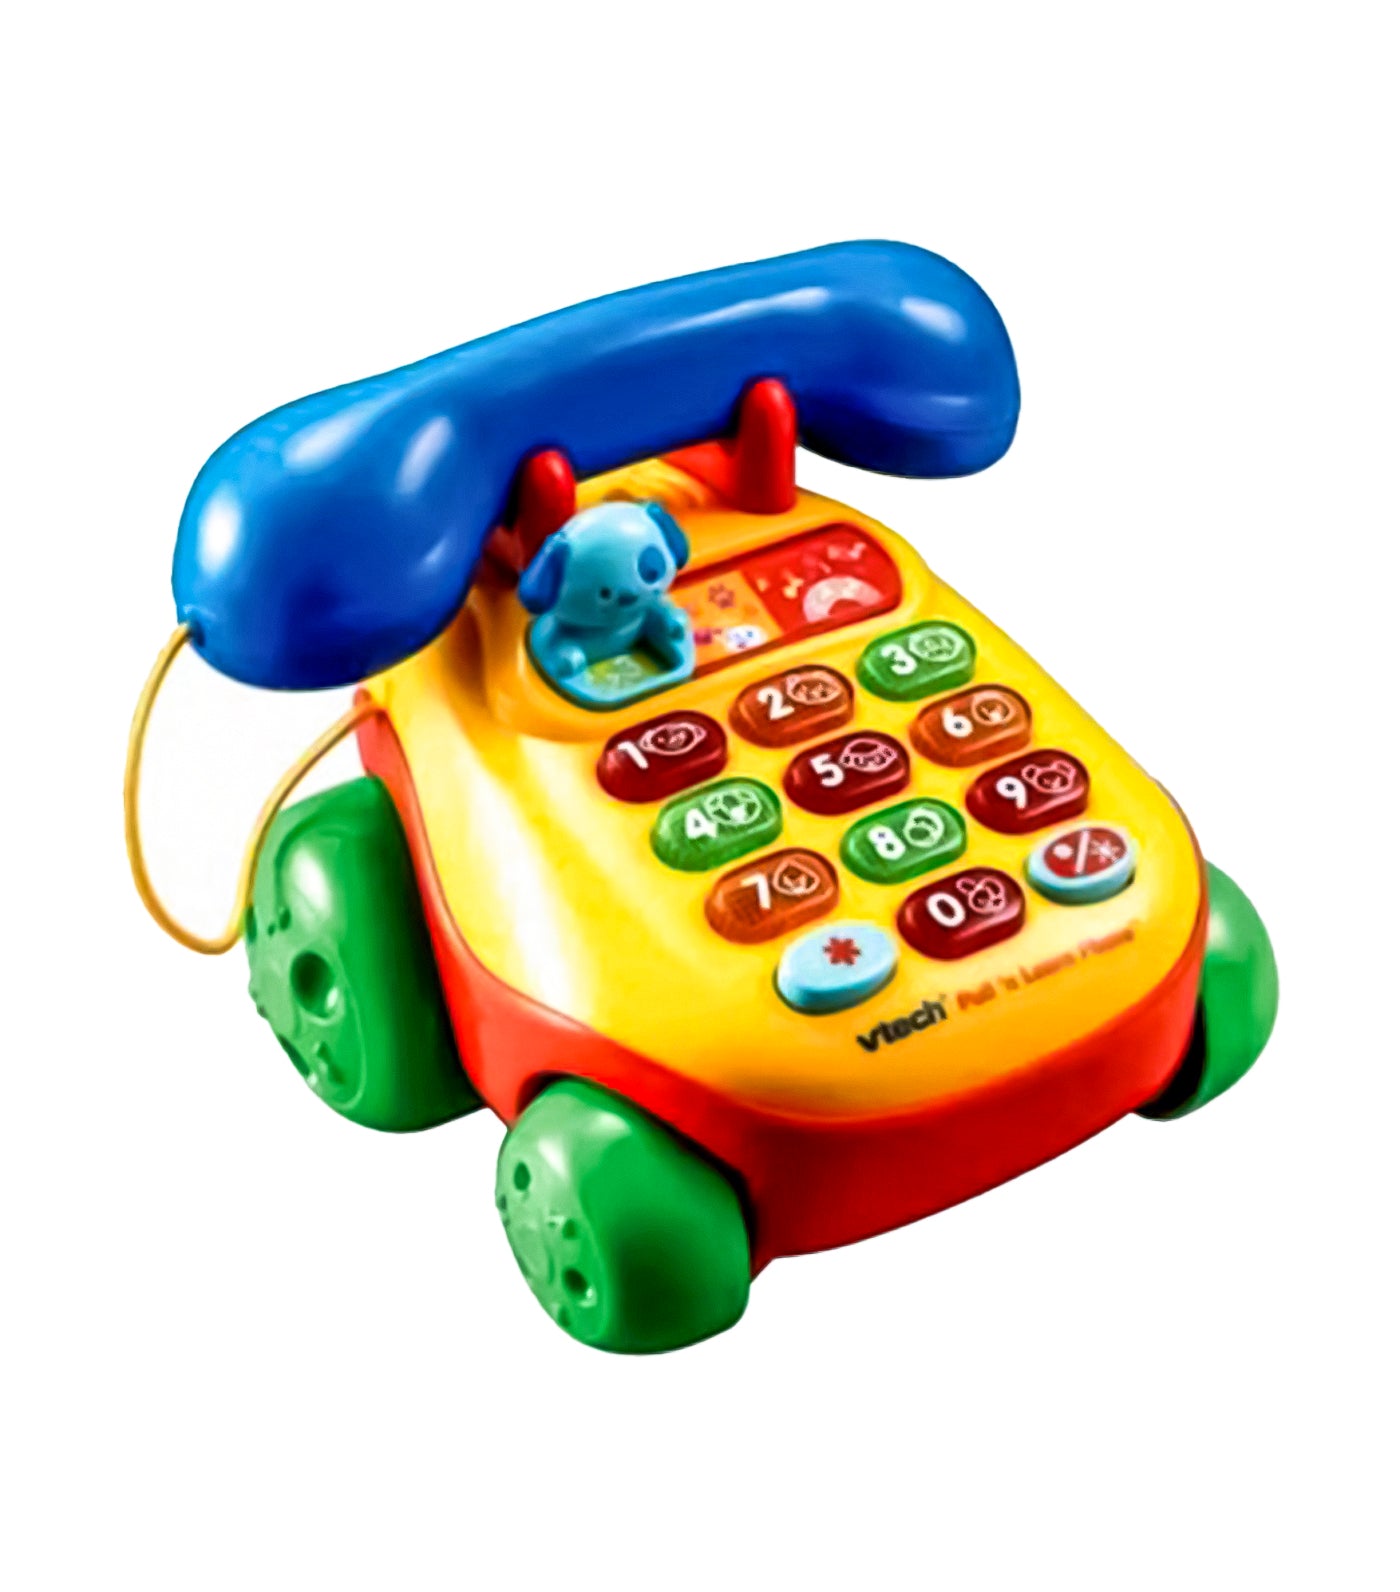 vtech pull and lights phone